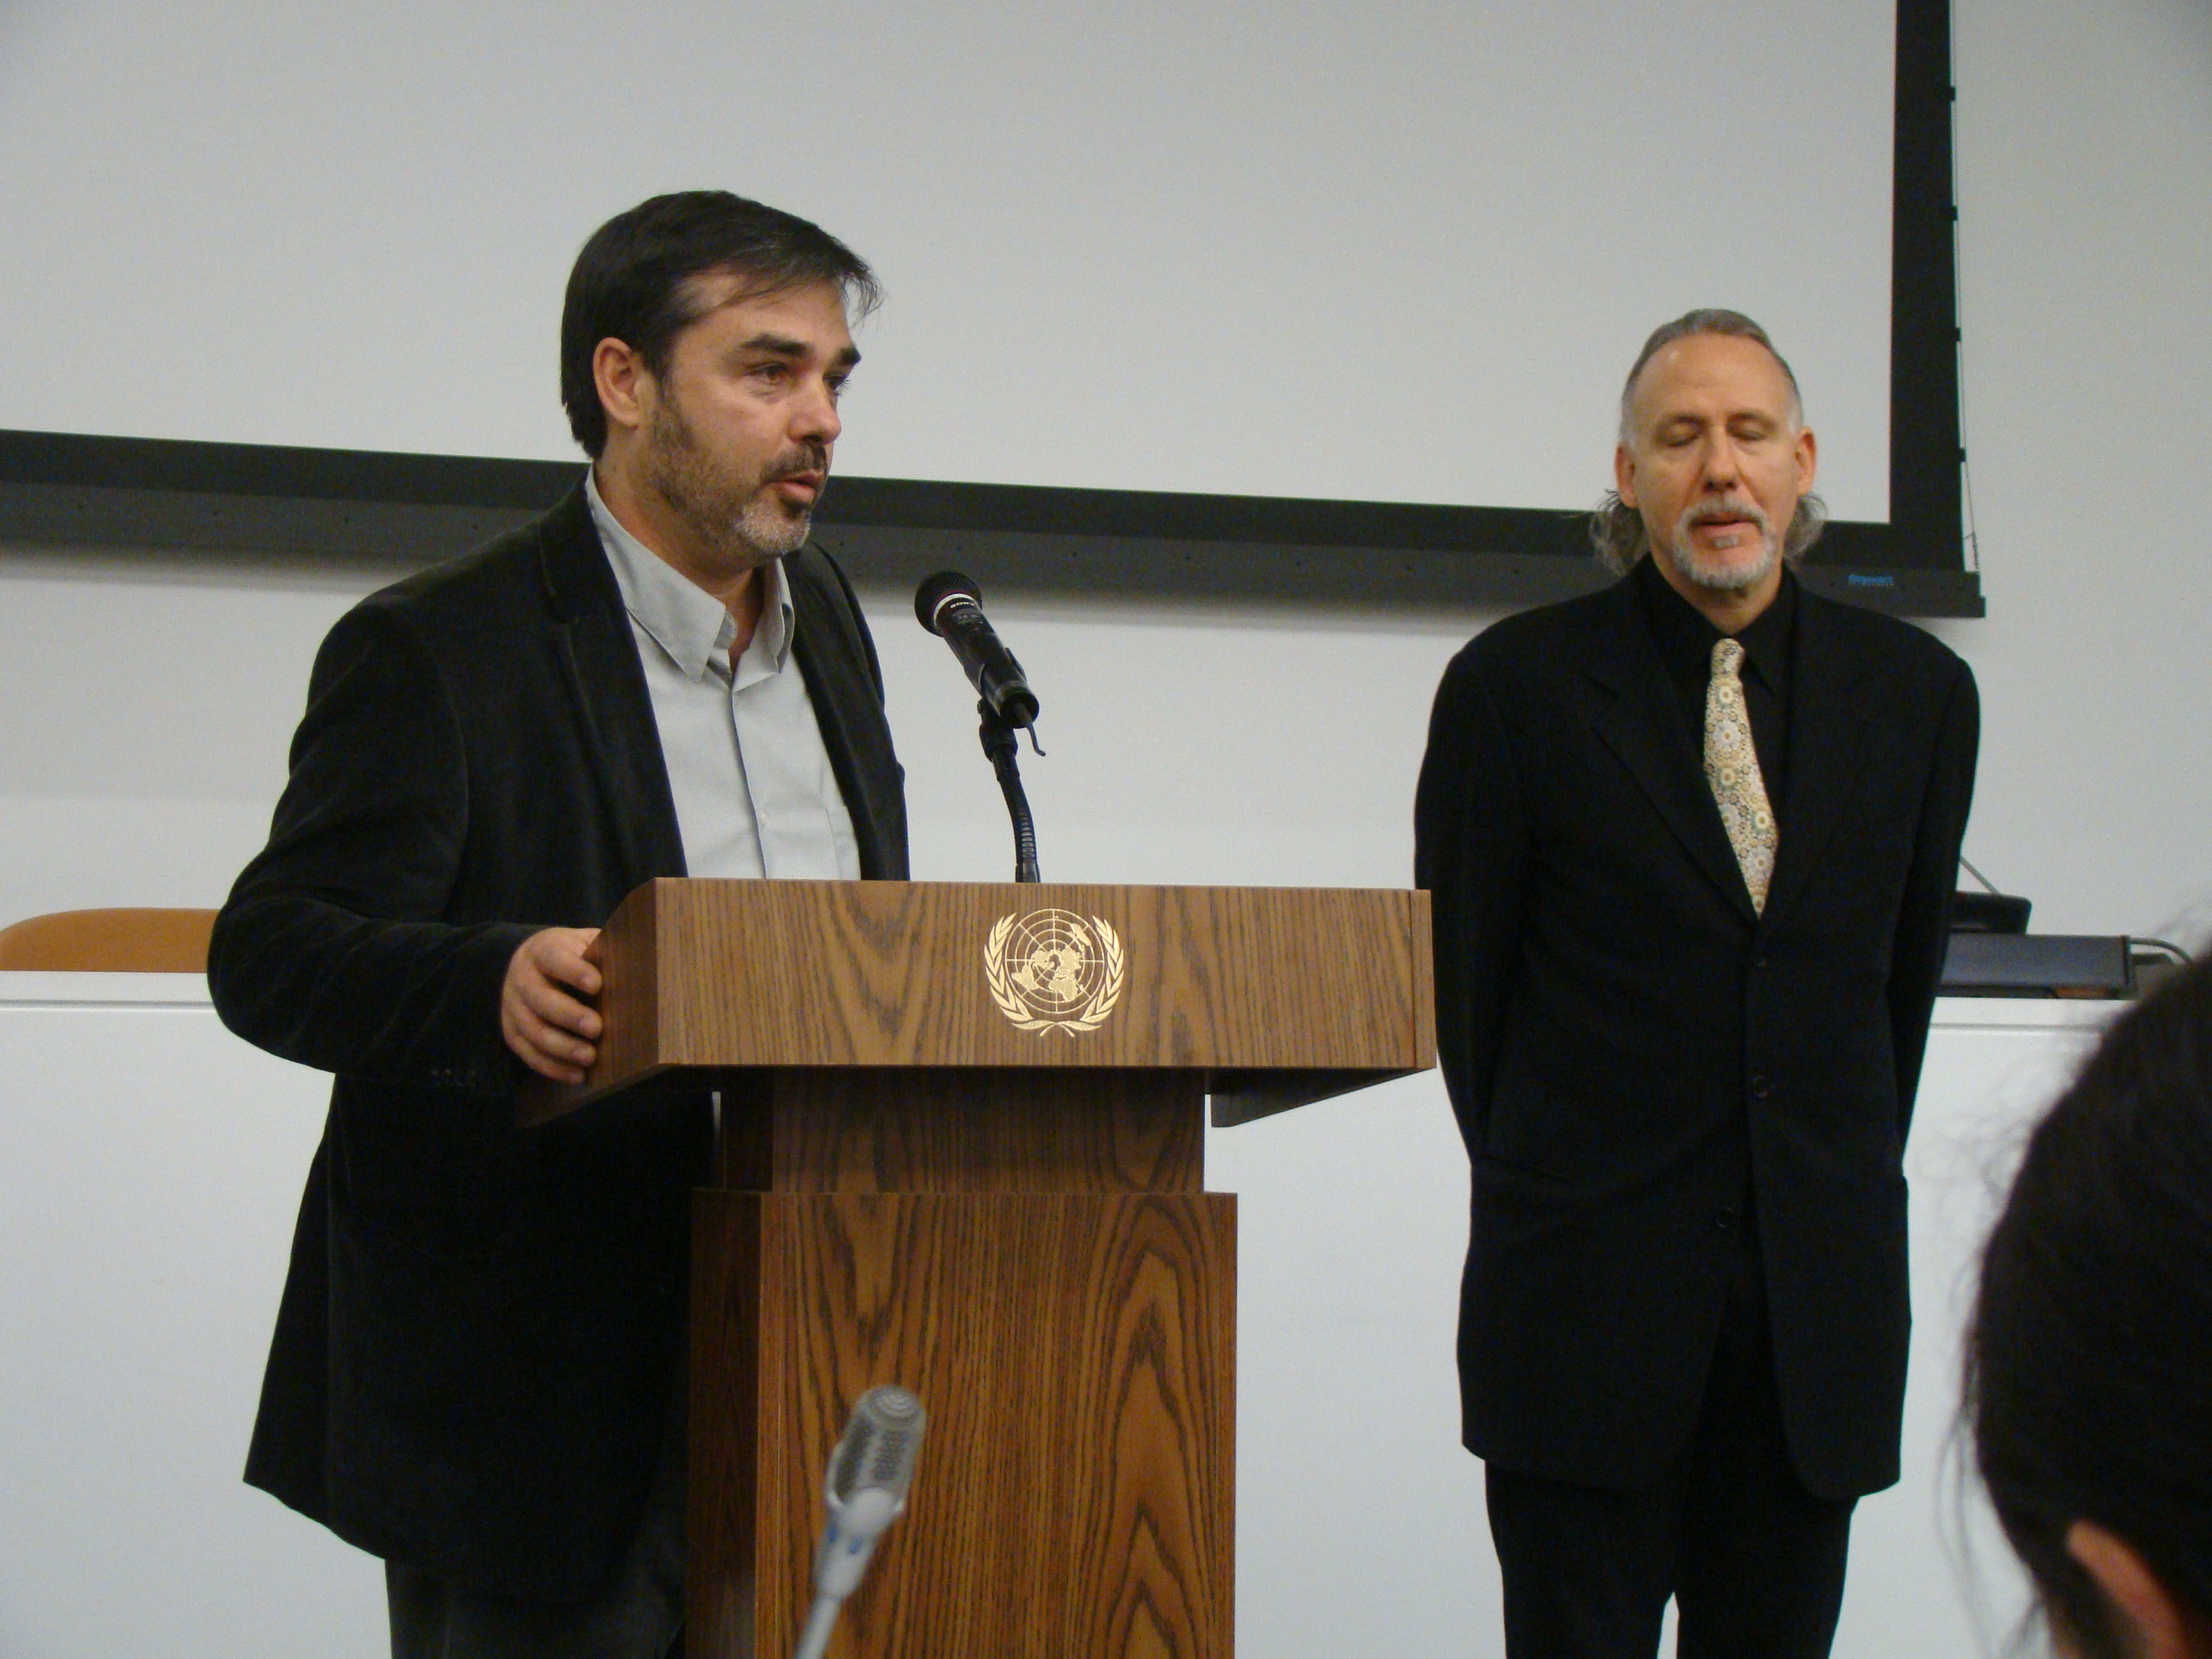 At UN headquarters in NYC presenting the film 